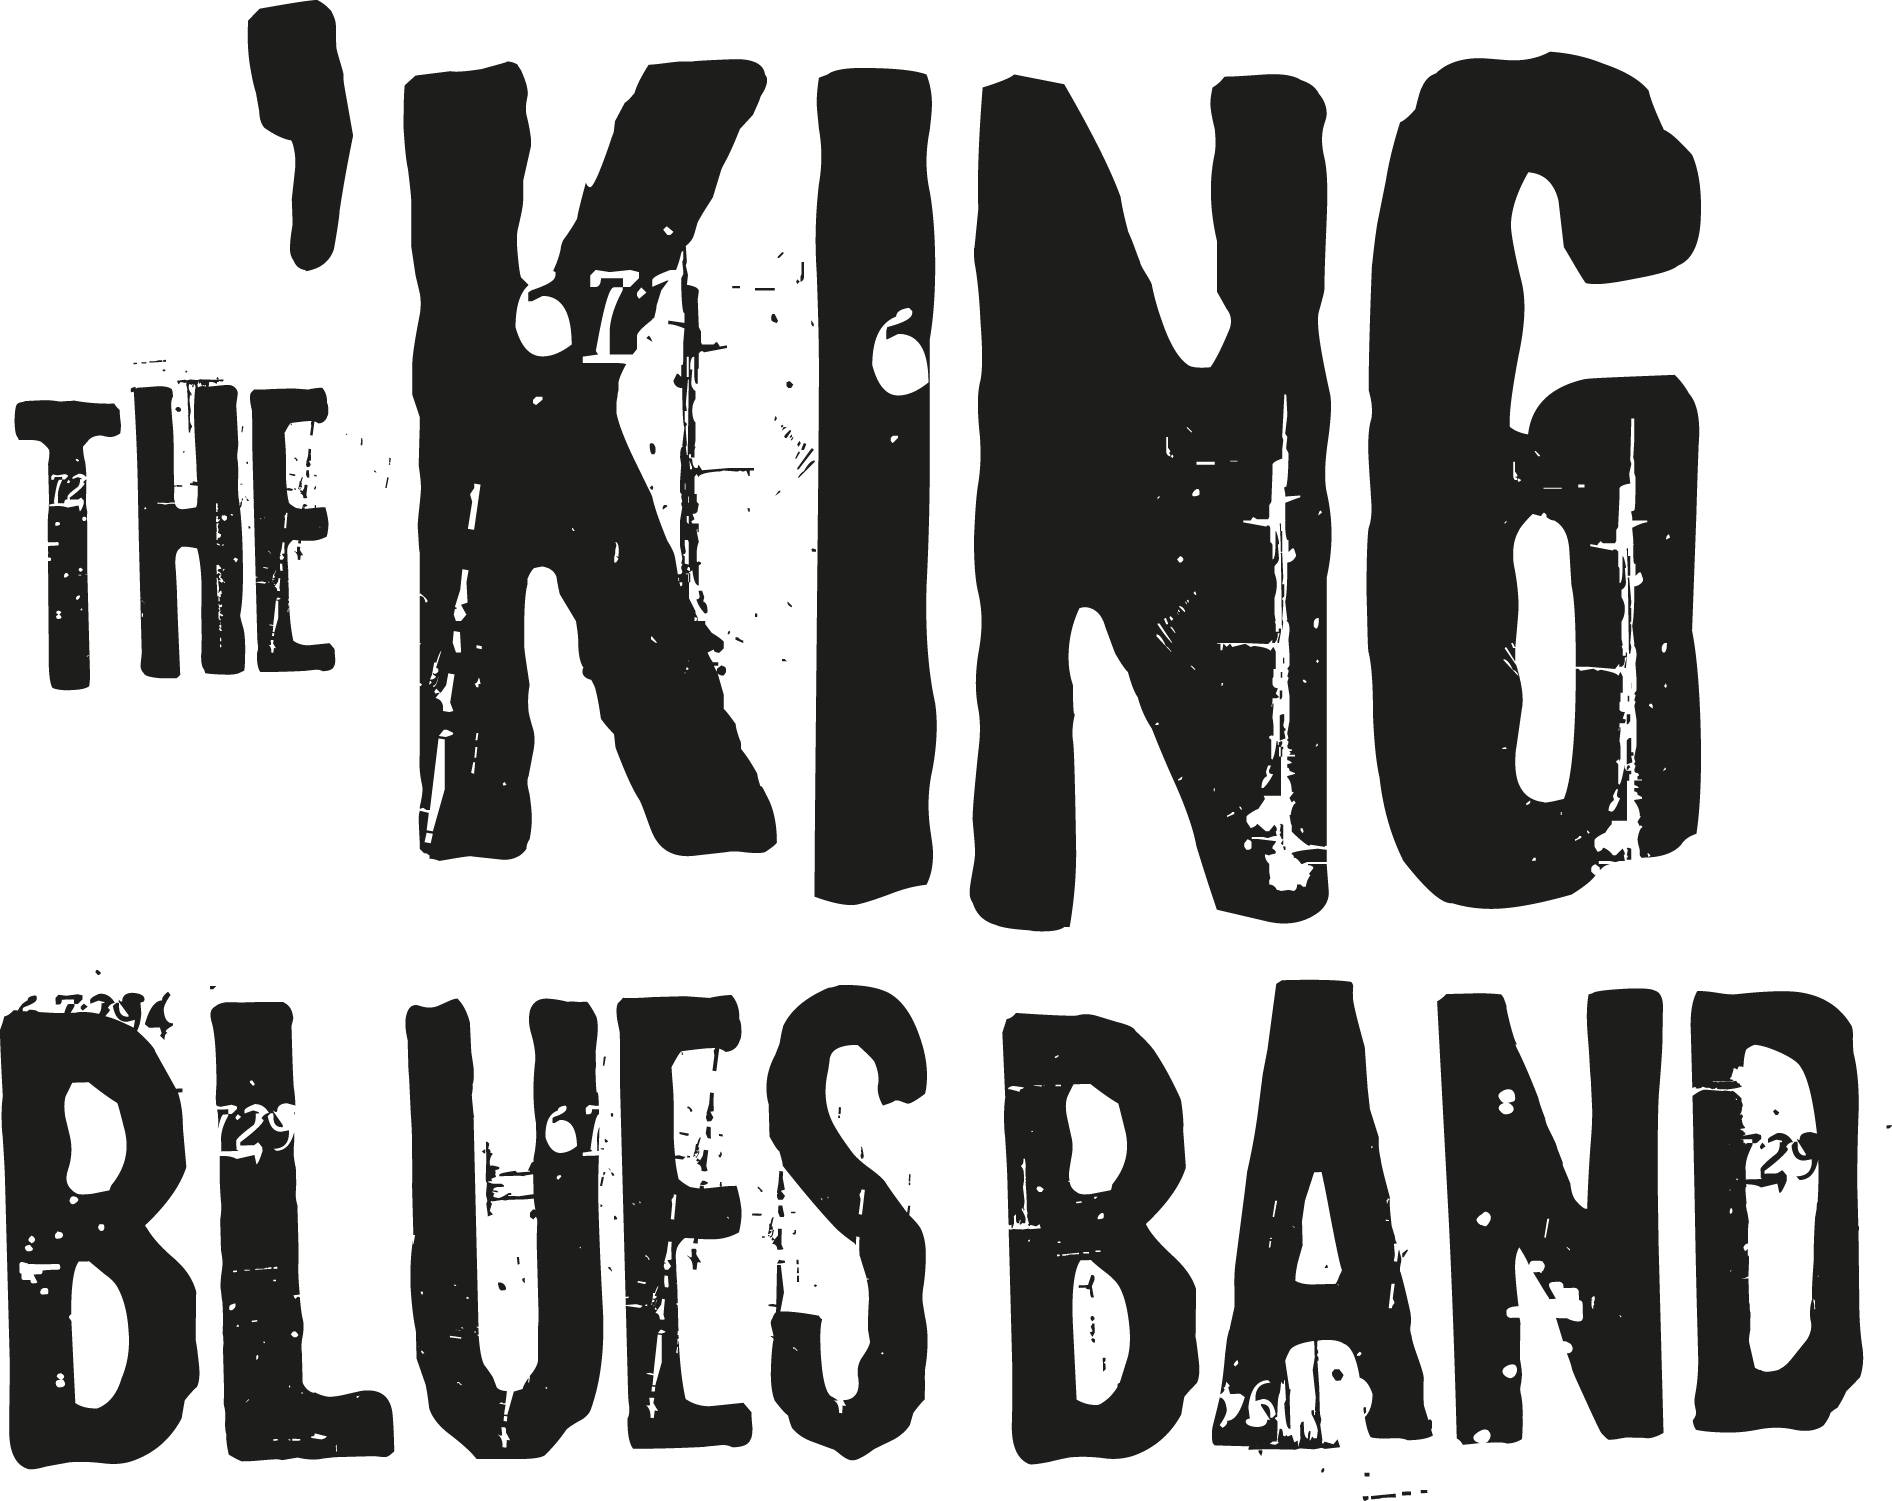 The 'King Blues Band